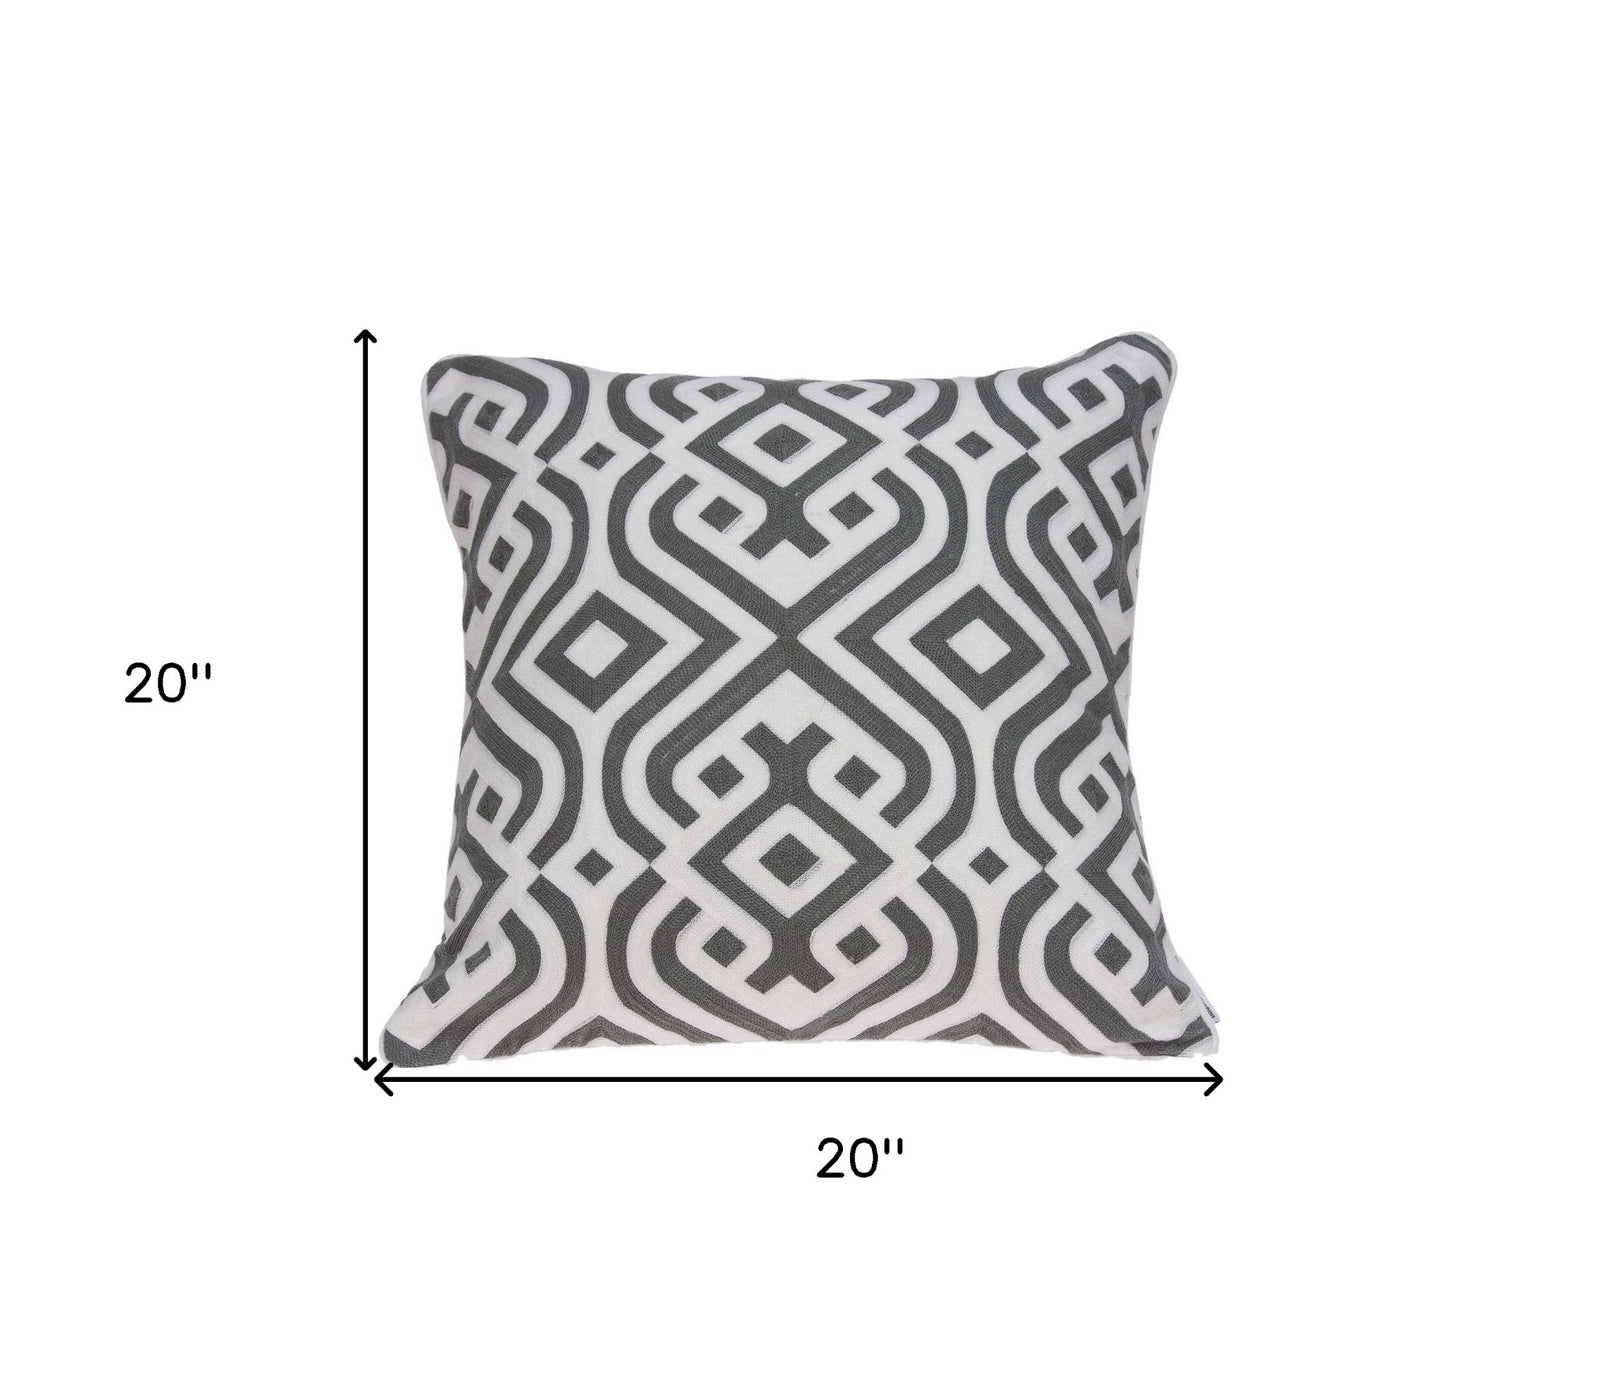 20" X 7" X 20" Gray And White Accent Pillow Cover With Poly Insert